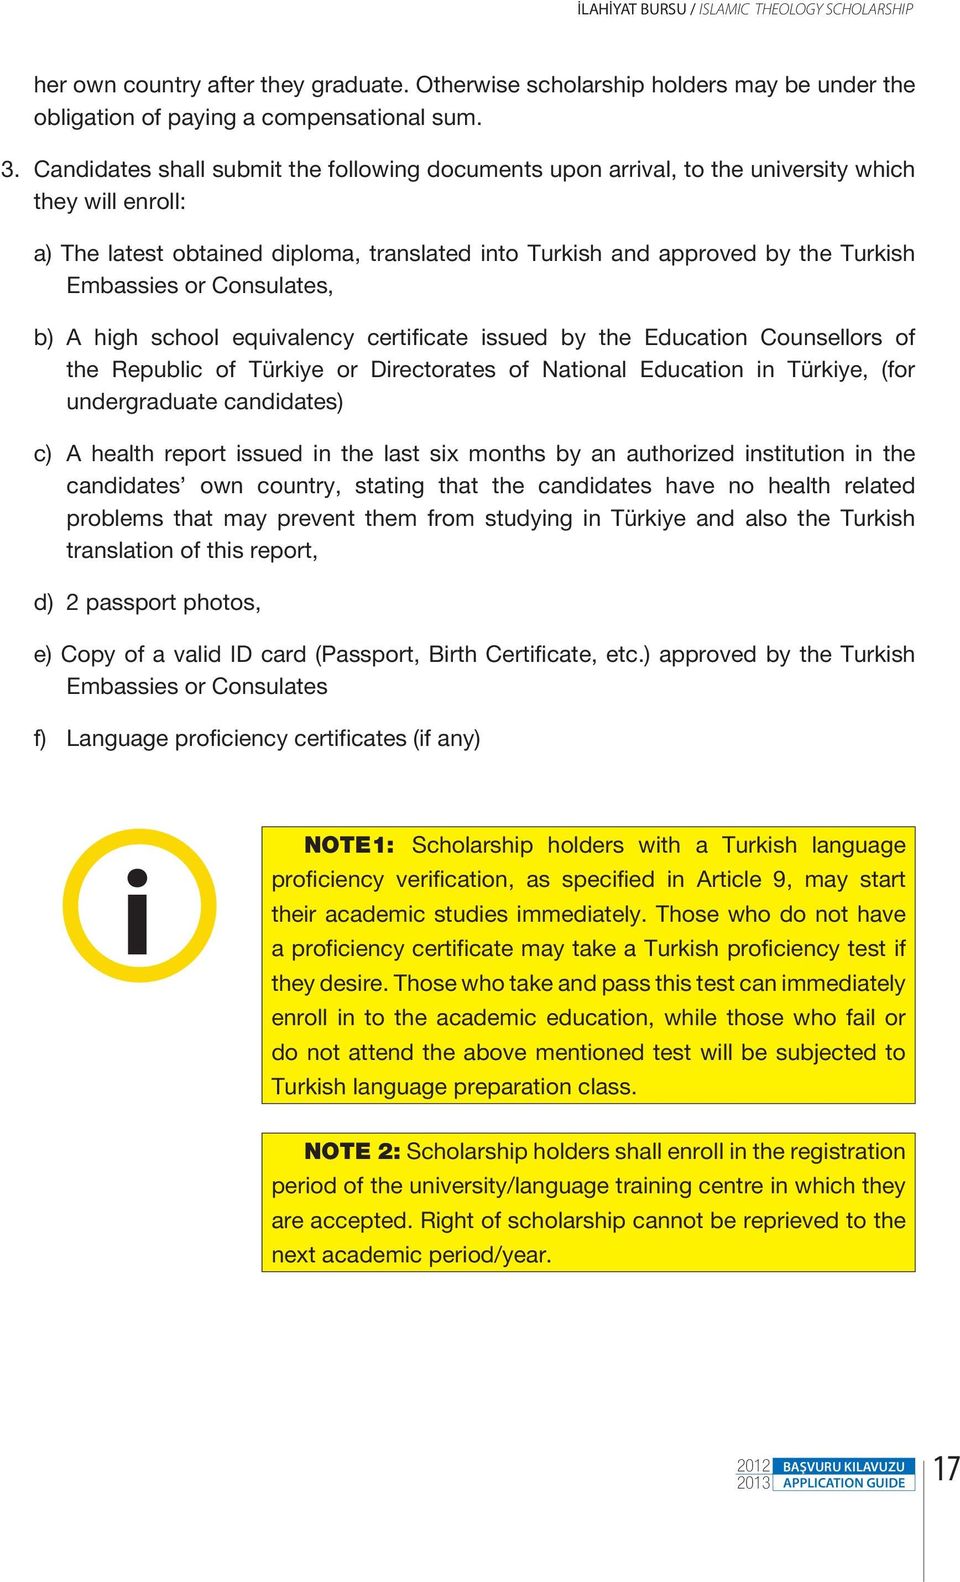 or Consulates, b) A high school equivalency certificate issued by the Education Counsellors of the Republic of Türkiye or Directorates of National Education in Türkiye, (for undergraduate candidates)